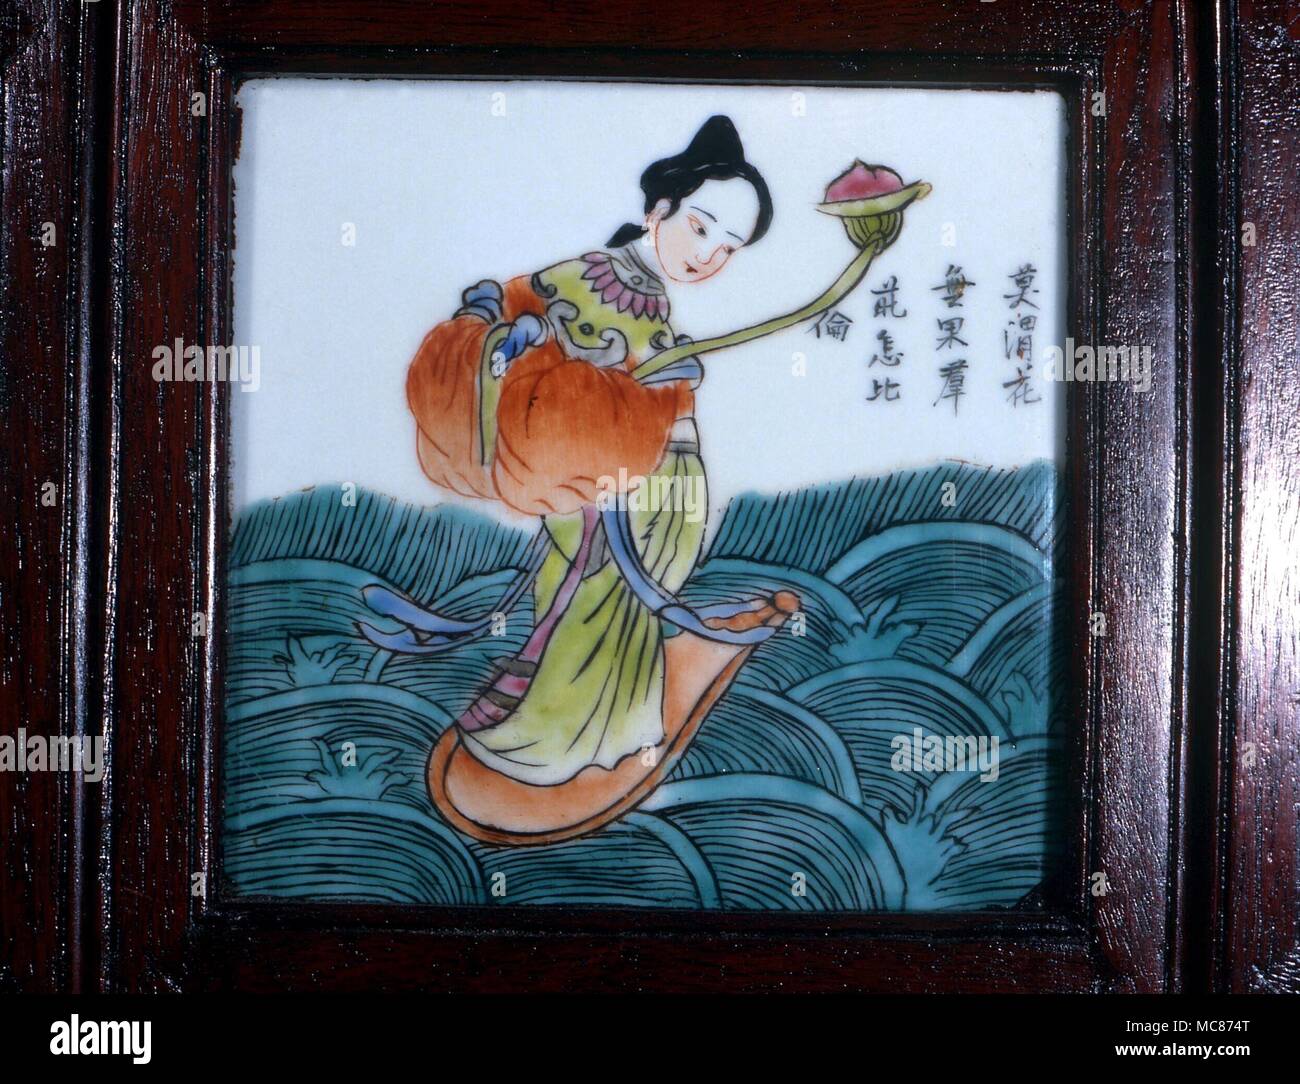 Taoism - One of the Taoist 'Eight Immortals- (Pa Hsien). Ho Hsien-ku with her emblem of the lotus. She ate of the supernatural peach, lives on powdered moonbeams and mother-of-pearl. Mid-19th century Chinese tile, from a screen Stock Photo